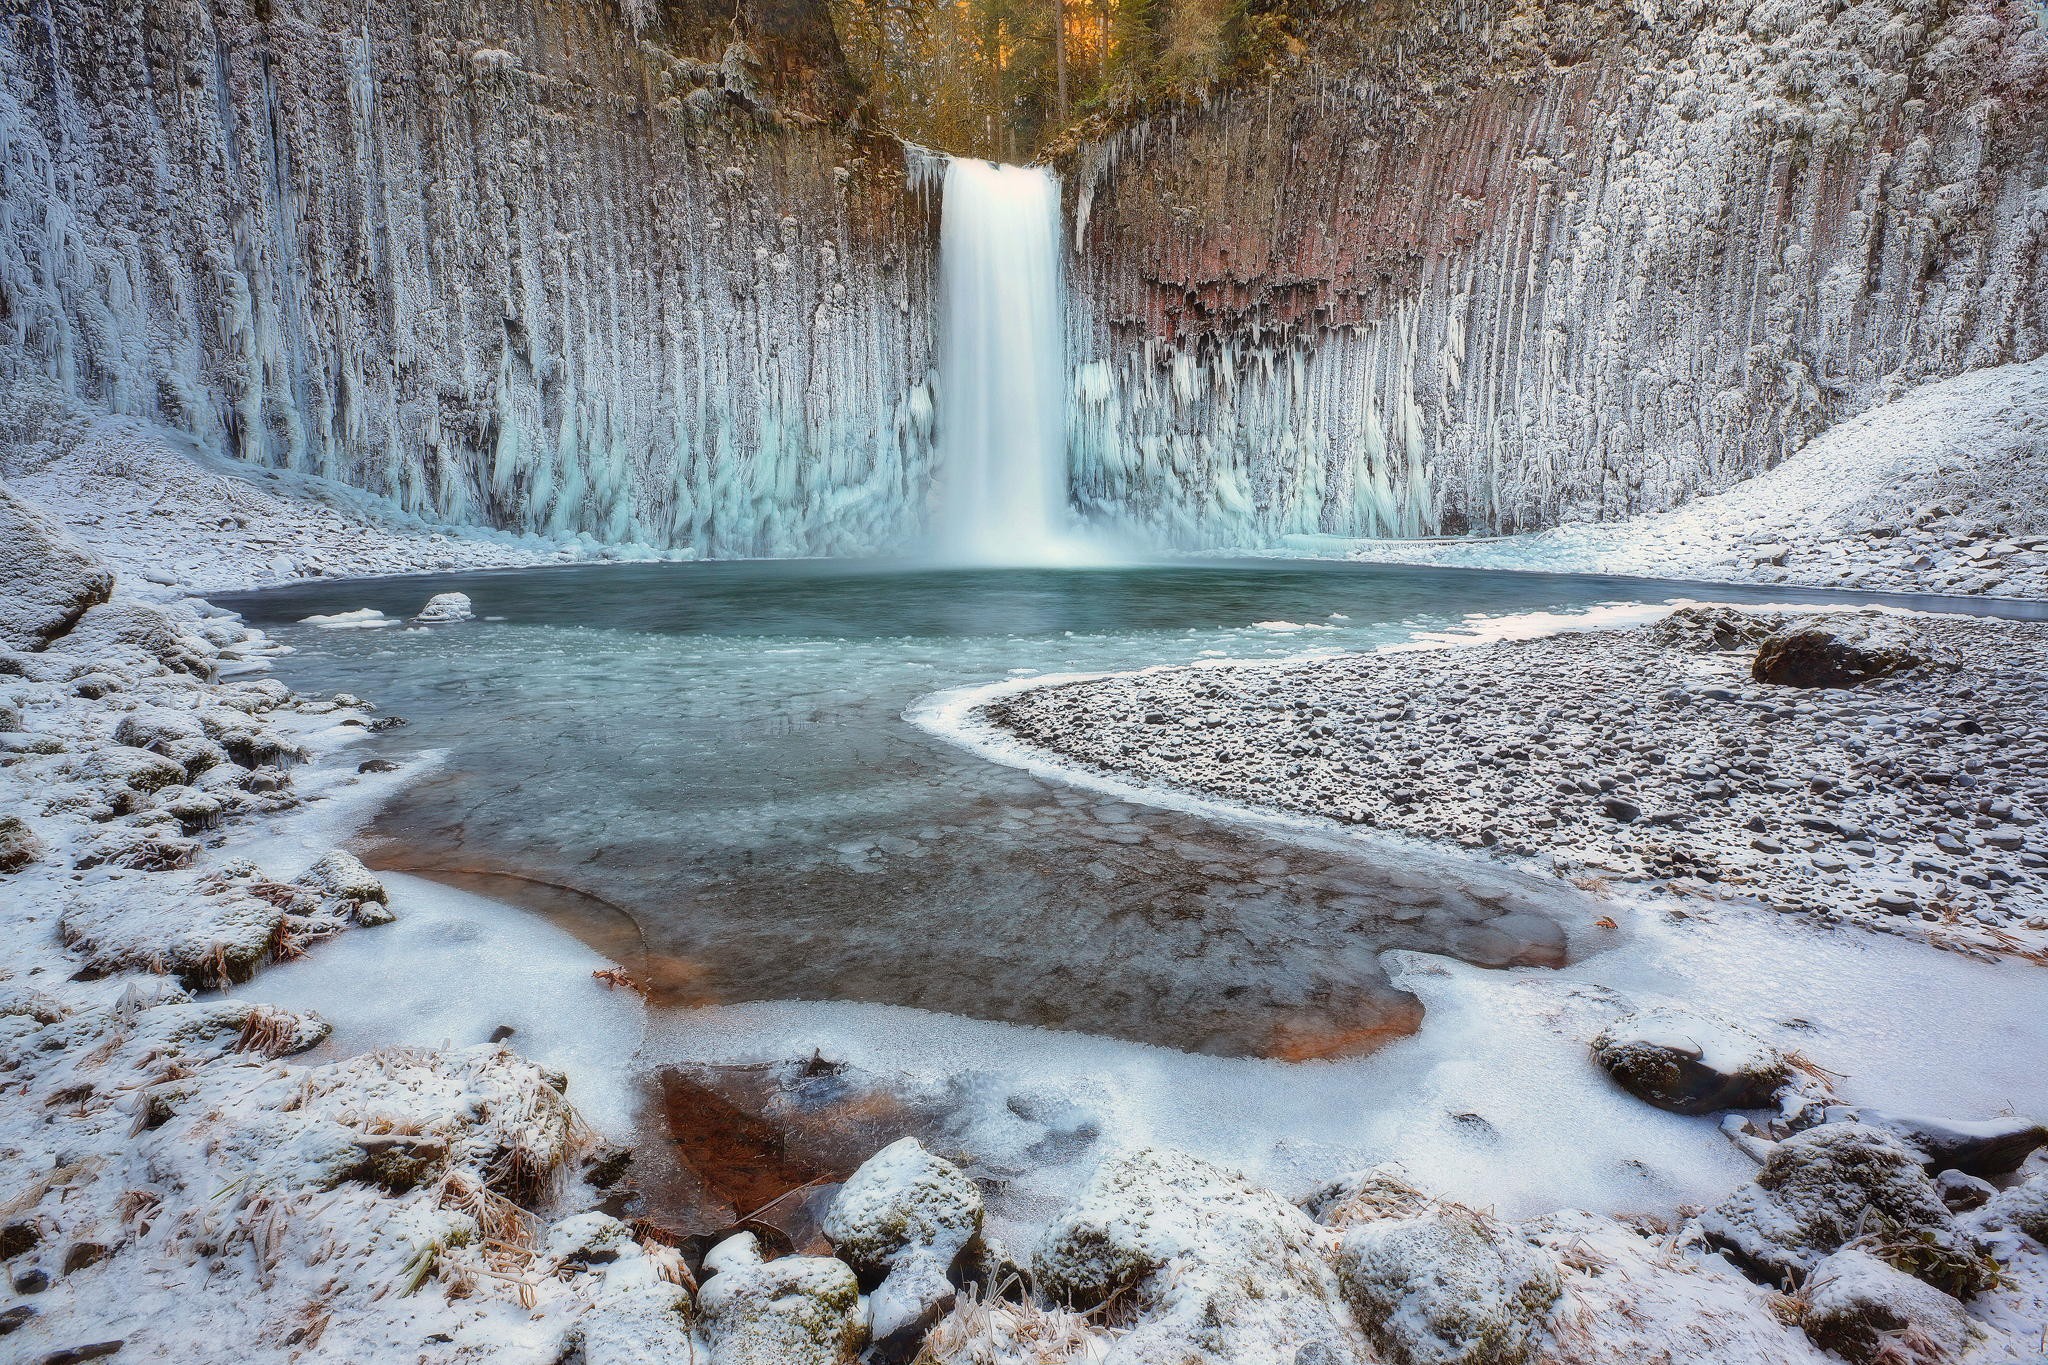 General 2048x1365 nature landscape water waterfall long exposure winter ice frost rocks snow lake